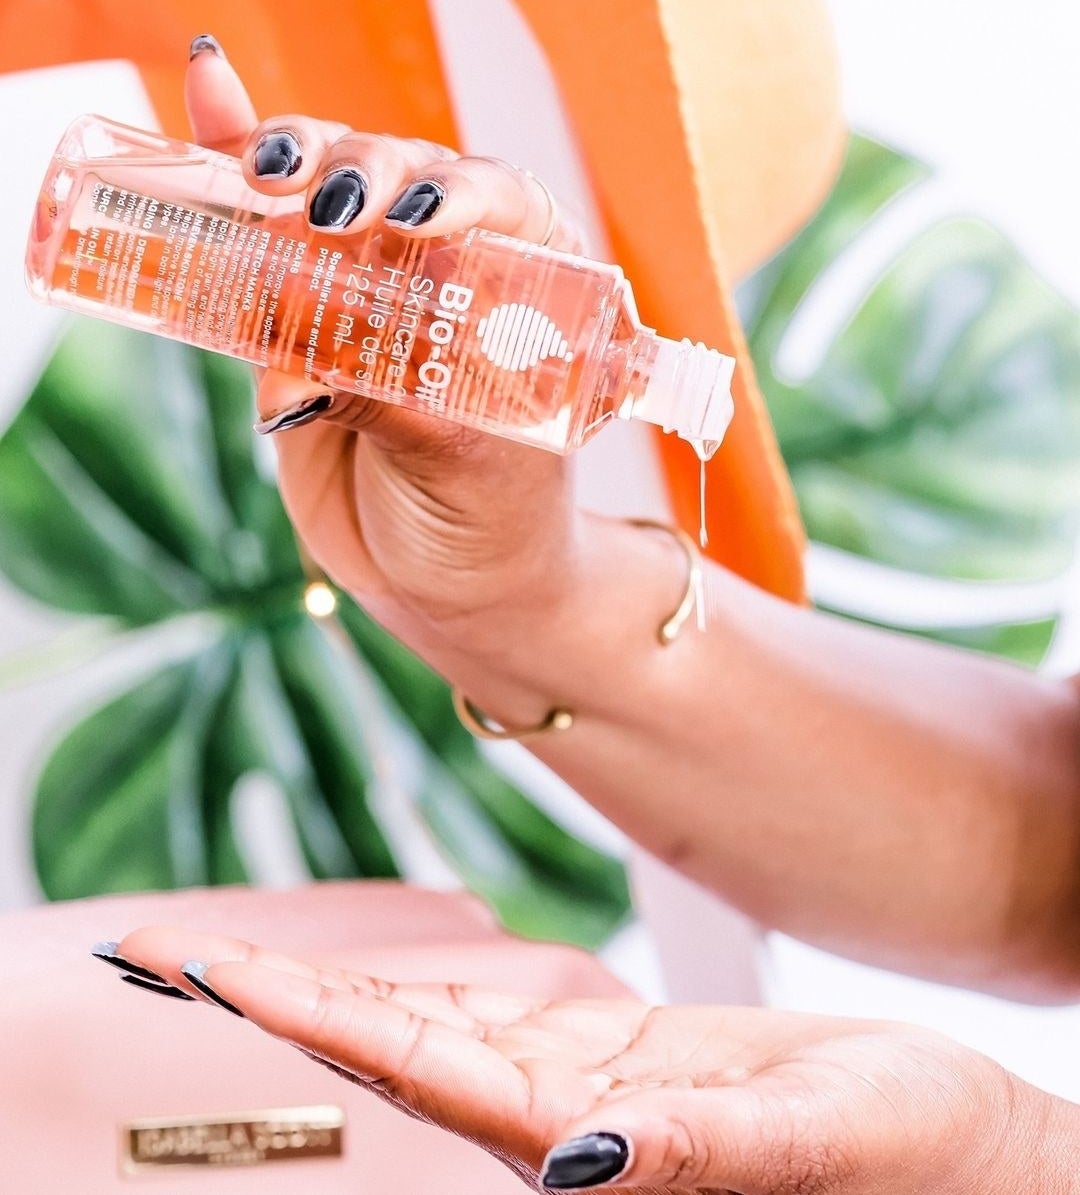 A person pouring Bio-Oil onto their hand